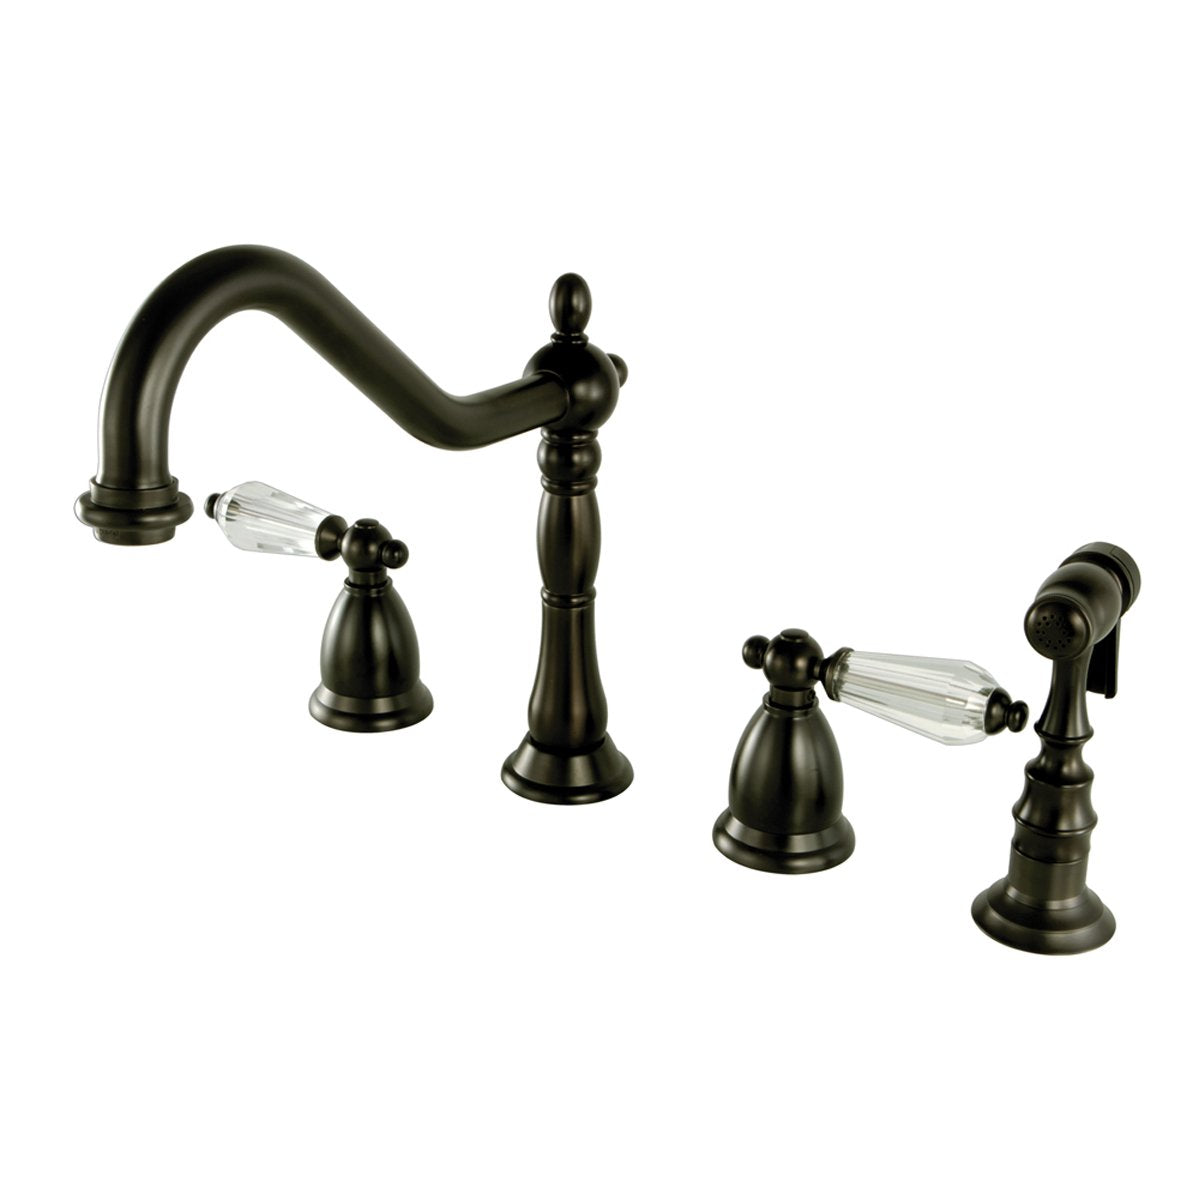 Kingston Brass Widespread Kitchen Faucet with Brass Sprayer-Kitchen Faucets-Free Shipping-Directsinks.